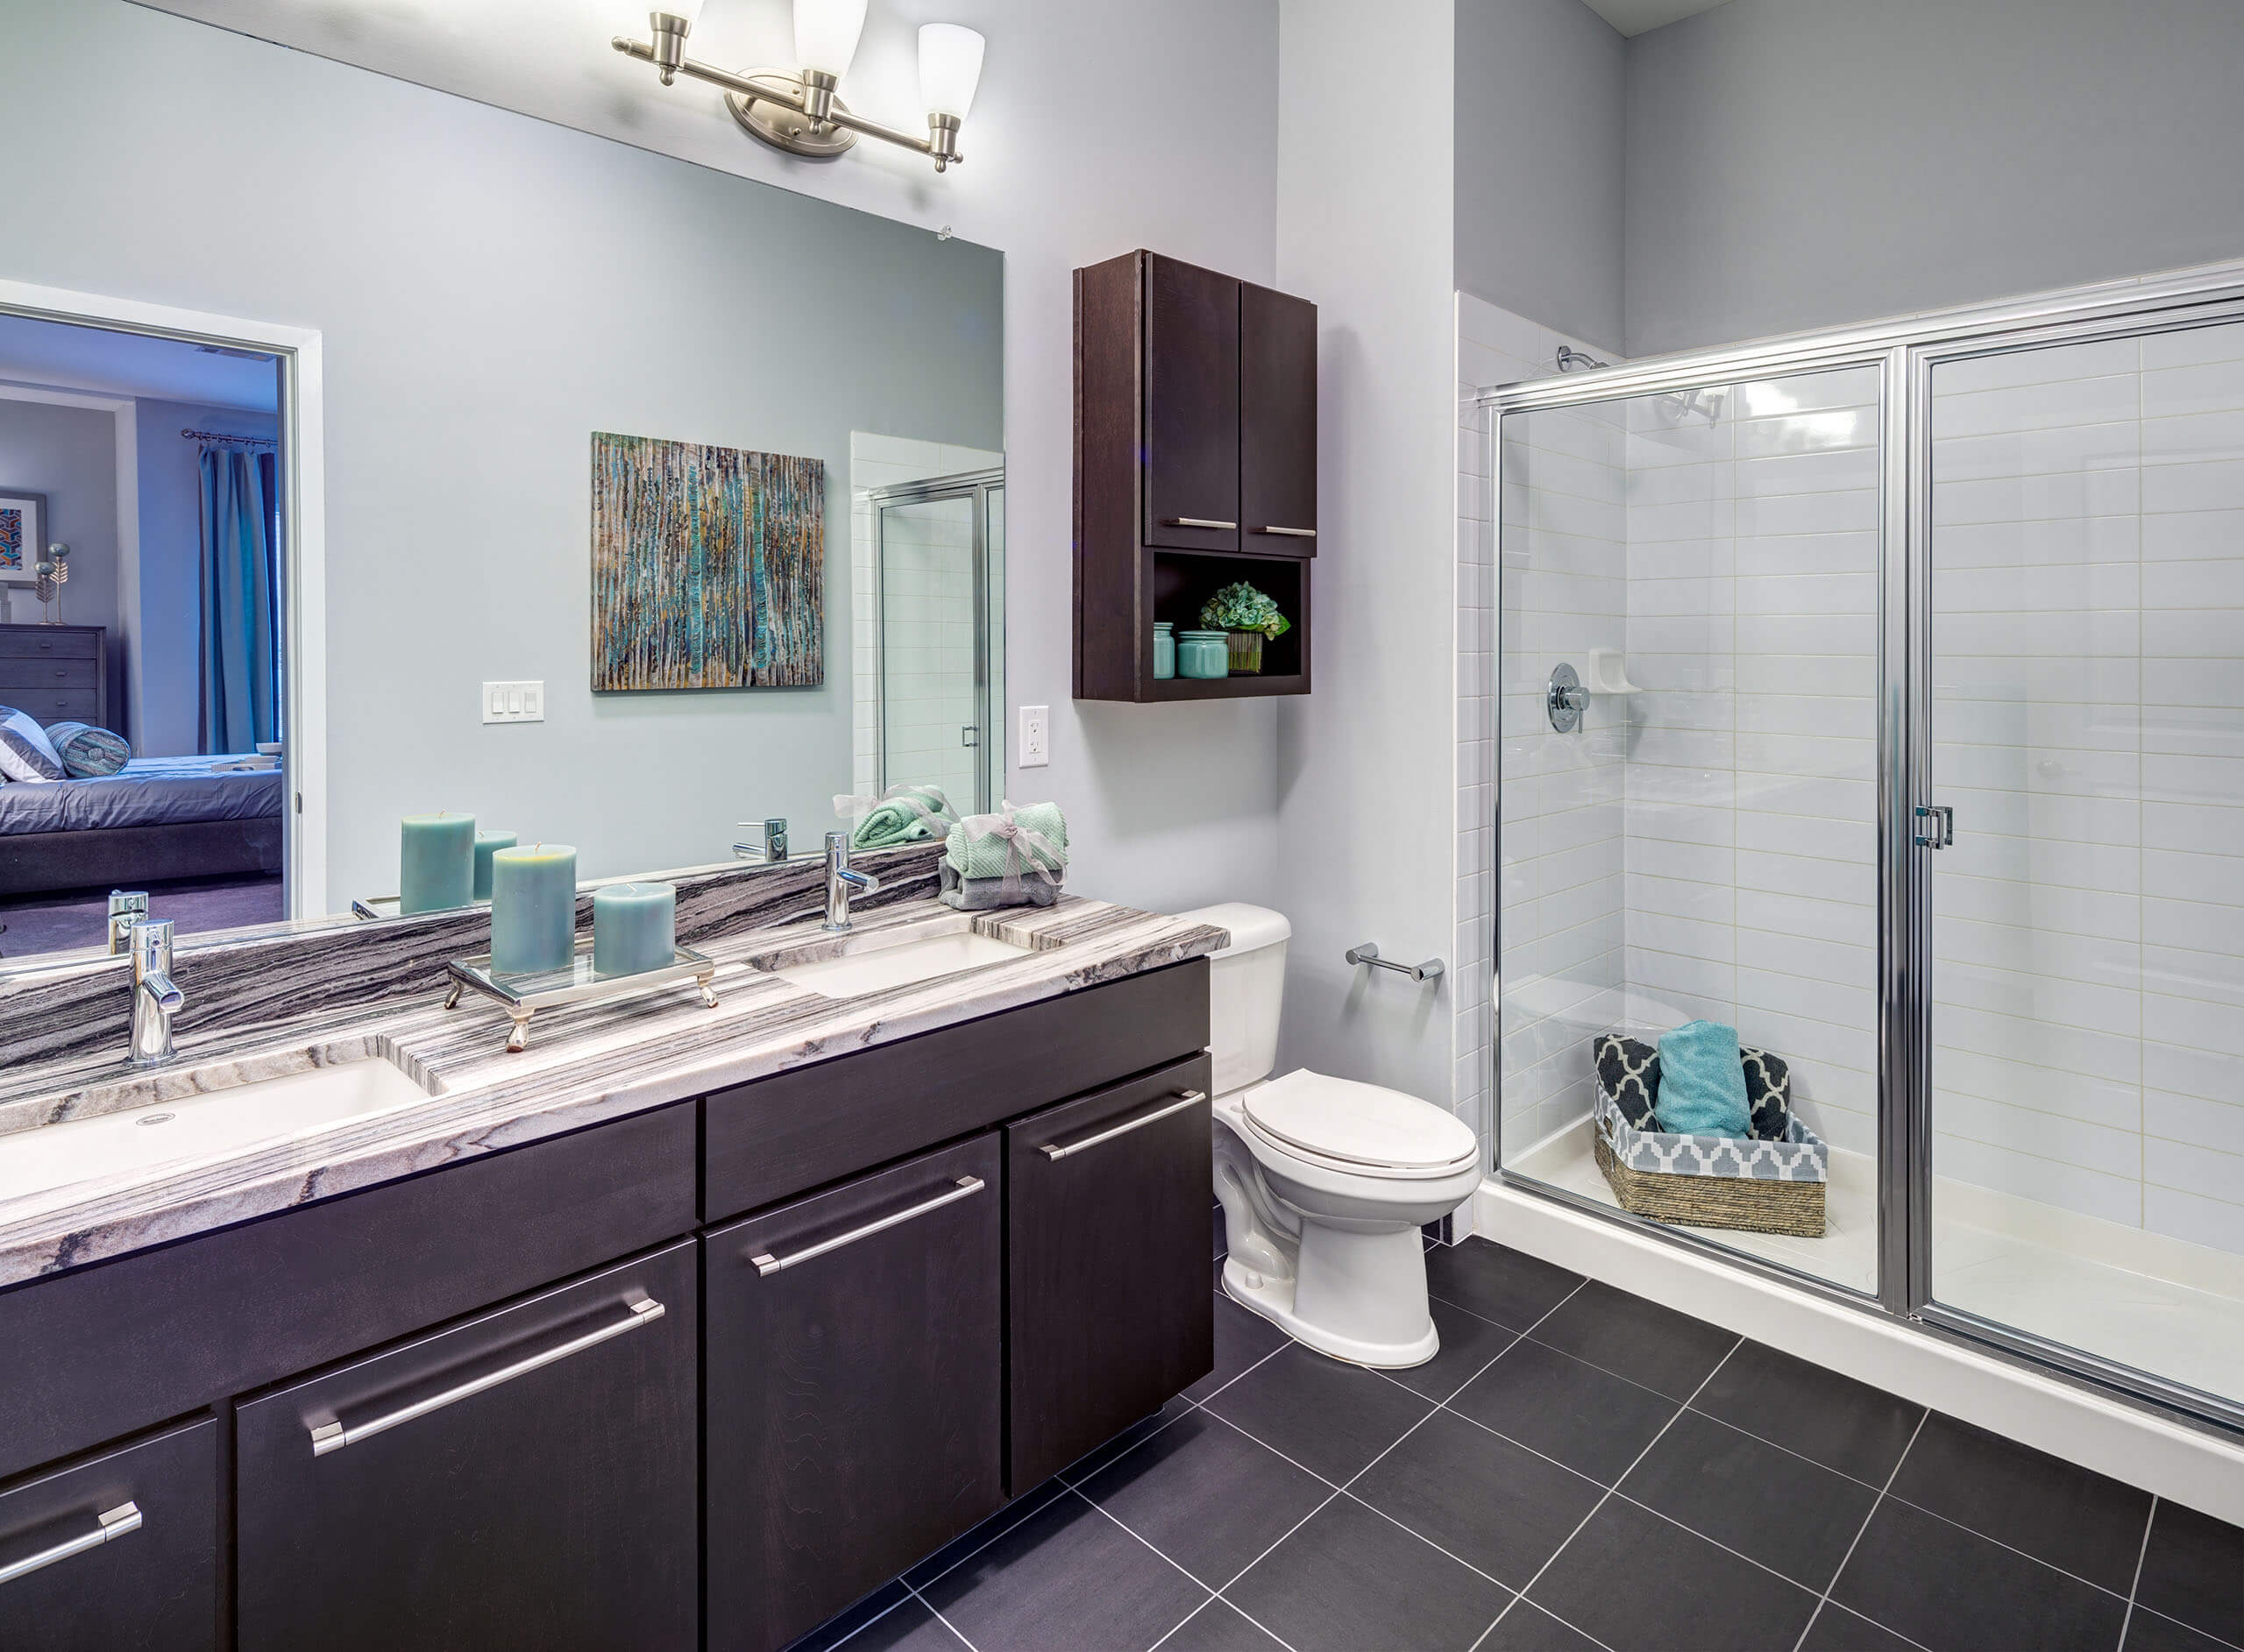 Bathroom with a dual sink vanity, tile flooring, and a large glass enclosed shower